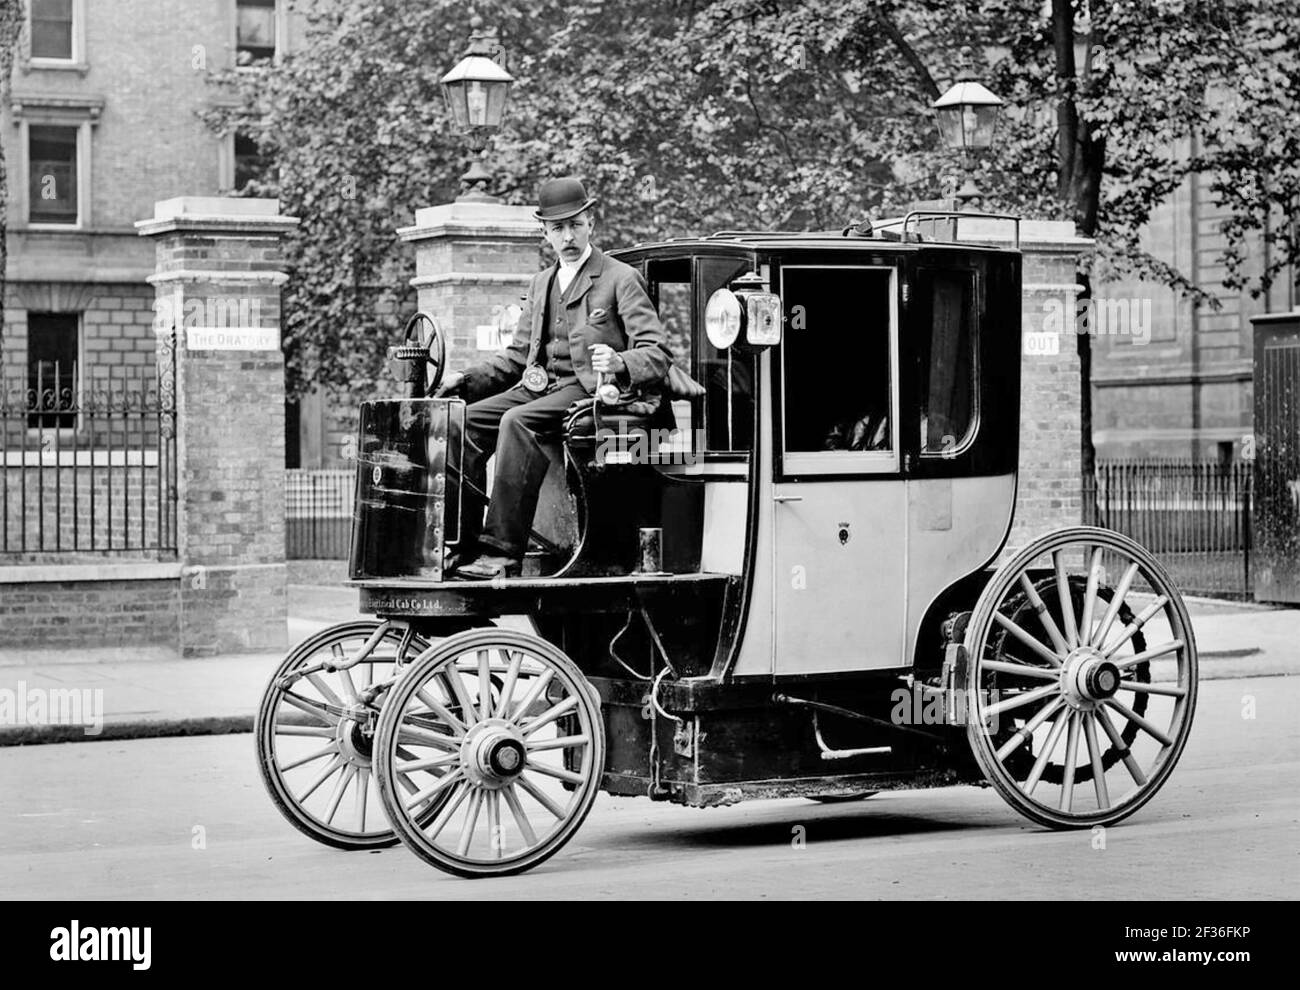 ELECTRIC MOTOR CAB about 1897 outside Brompton Oratory, London. Designed by Walter Charles Bersey it was one of about 75 operated by the London Electrical Cab Company.  Nicknamed The Hummingbirds because of the noise they made the range was about 30-35 miles. The colour was black and yellow. Stock Photo